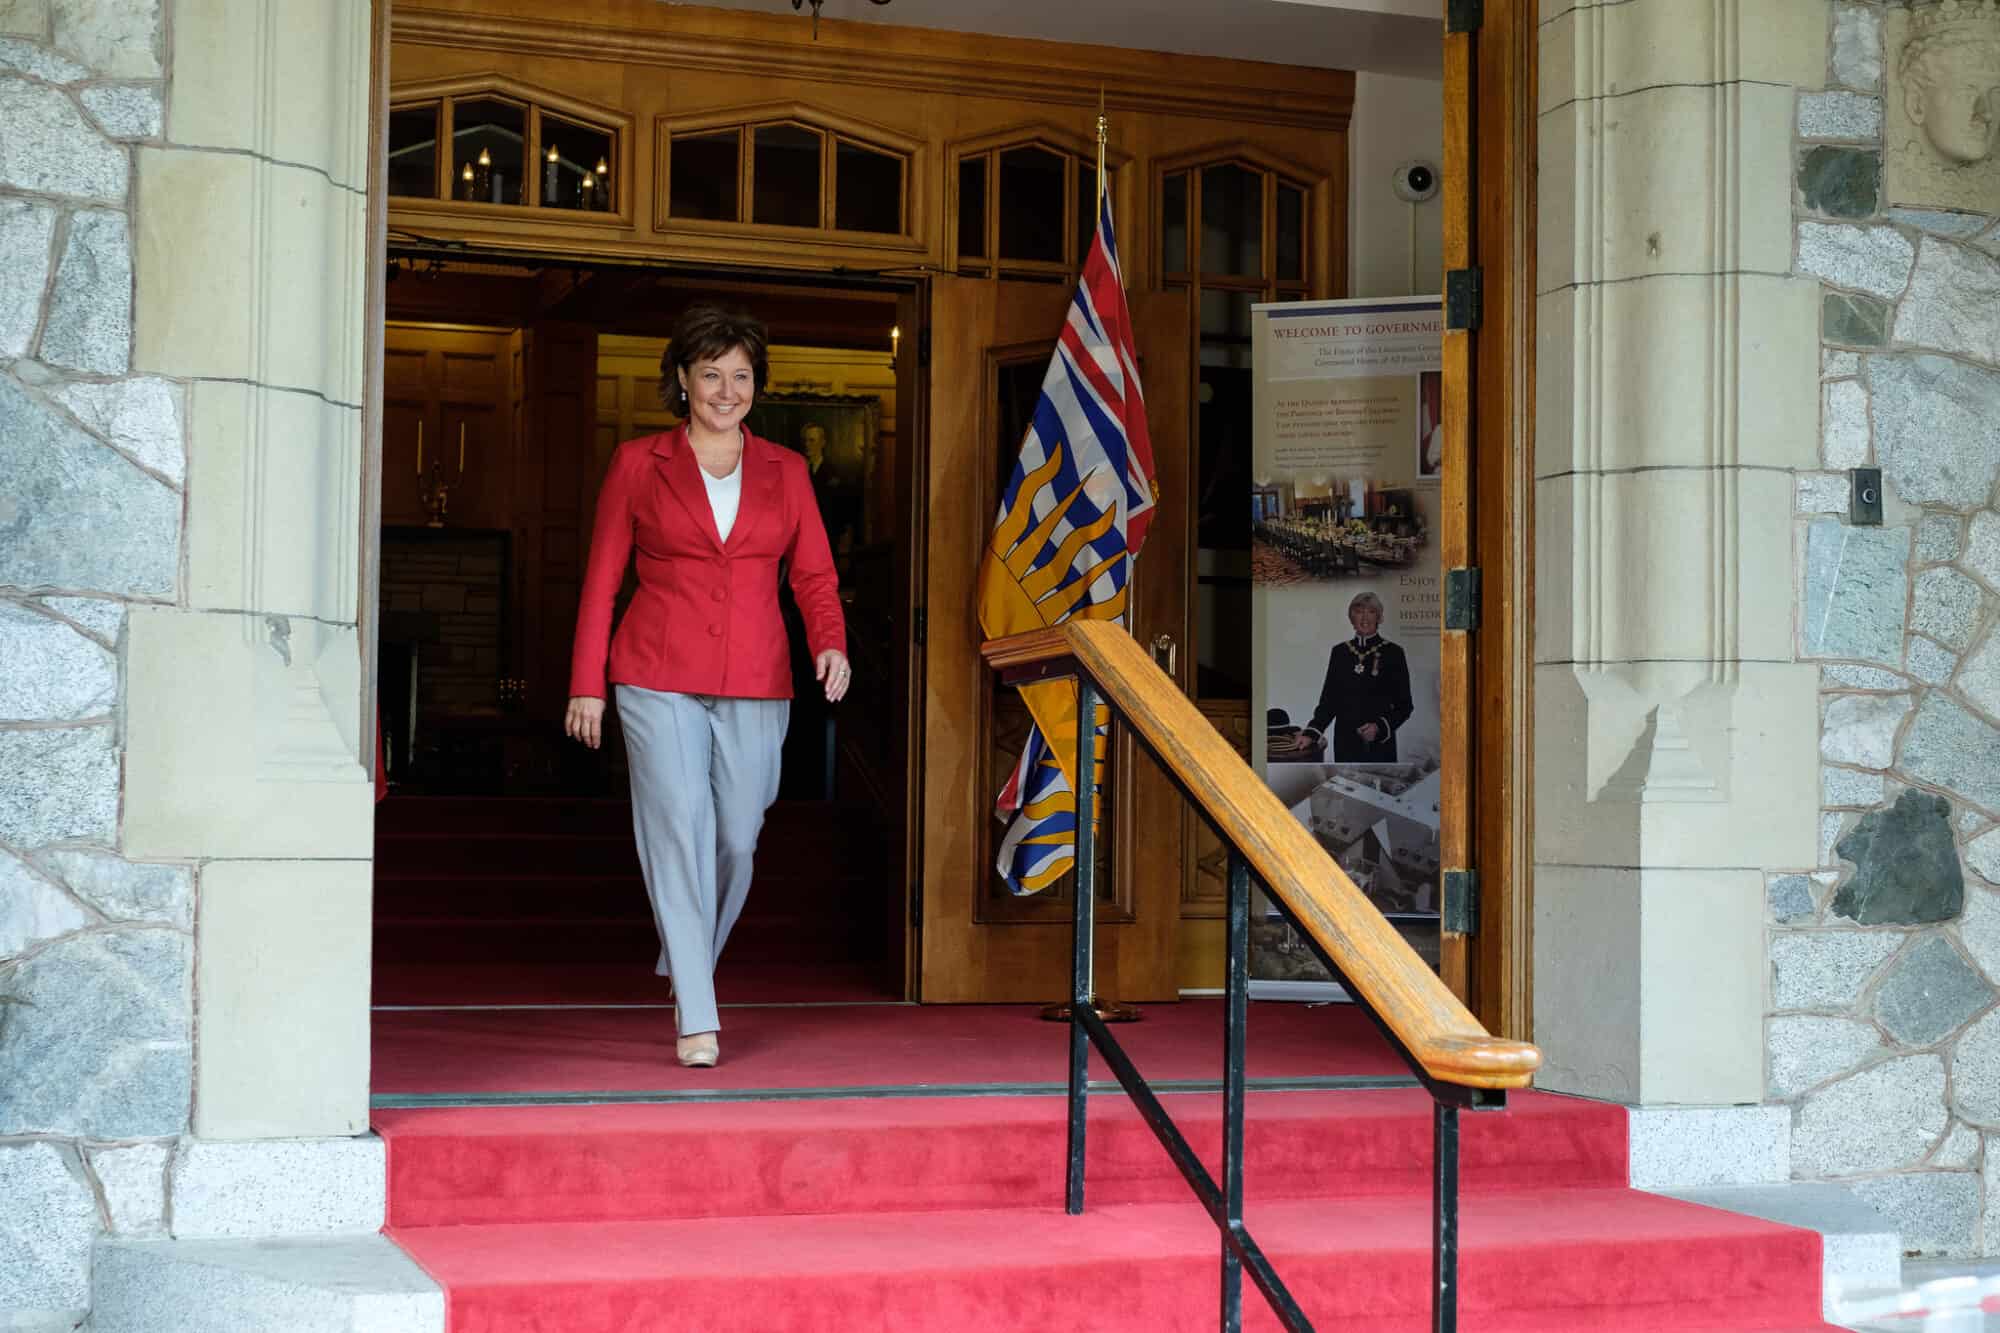 Christy Clark’s inaction on housing affordability speaks volumes